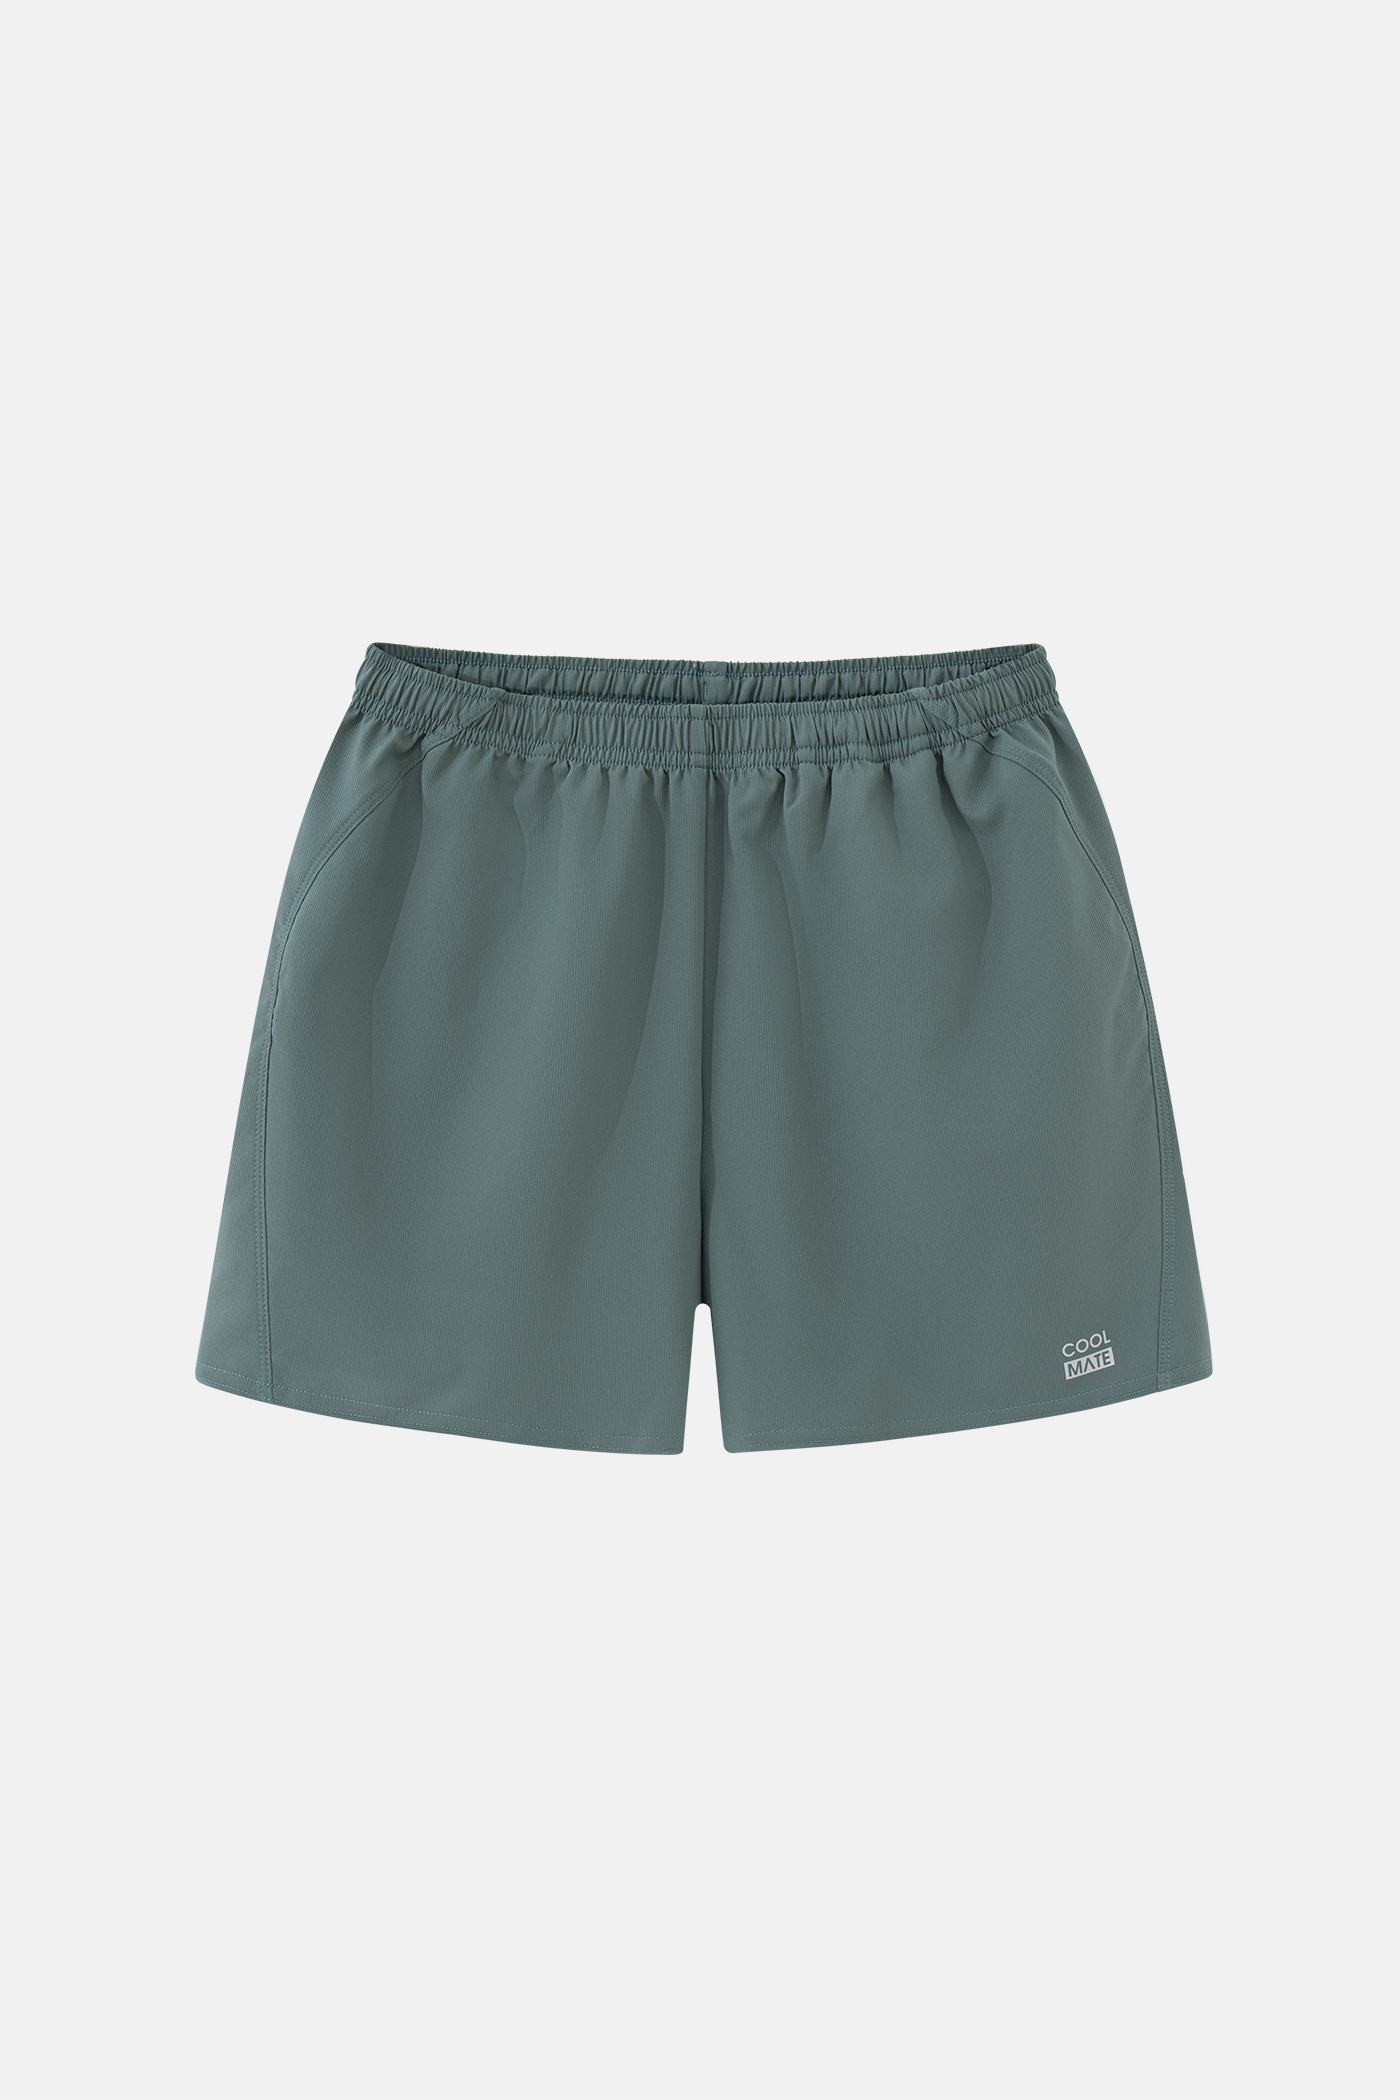 Shorts thể thao 5" 